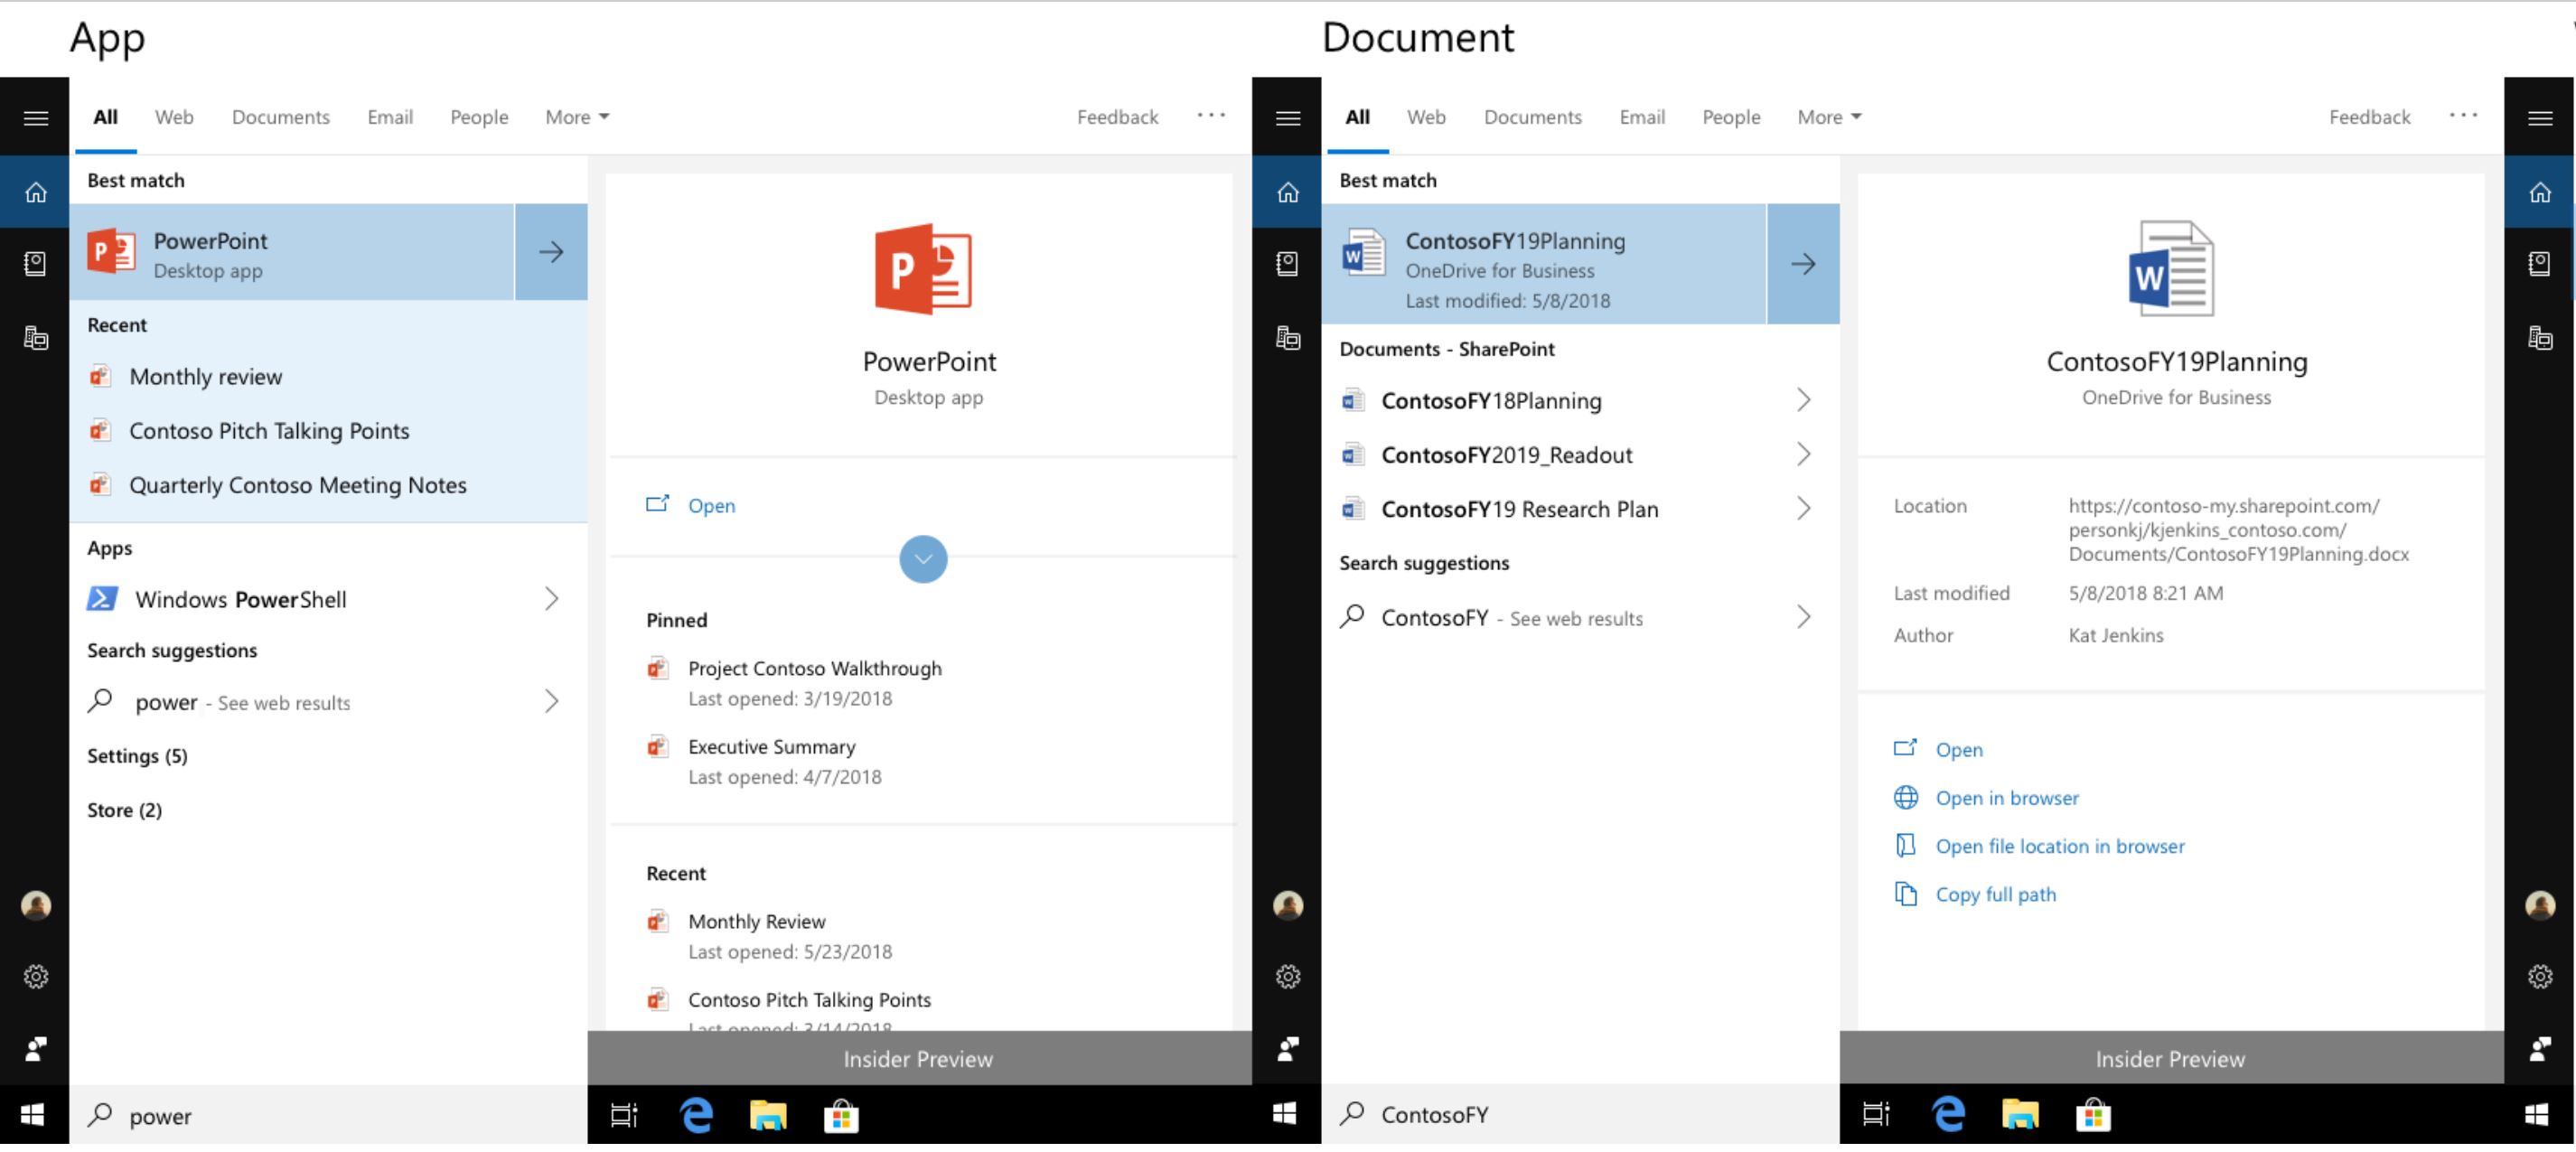 Microsoft brings improved search previews with support for apps and documents